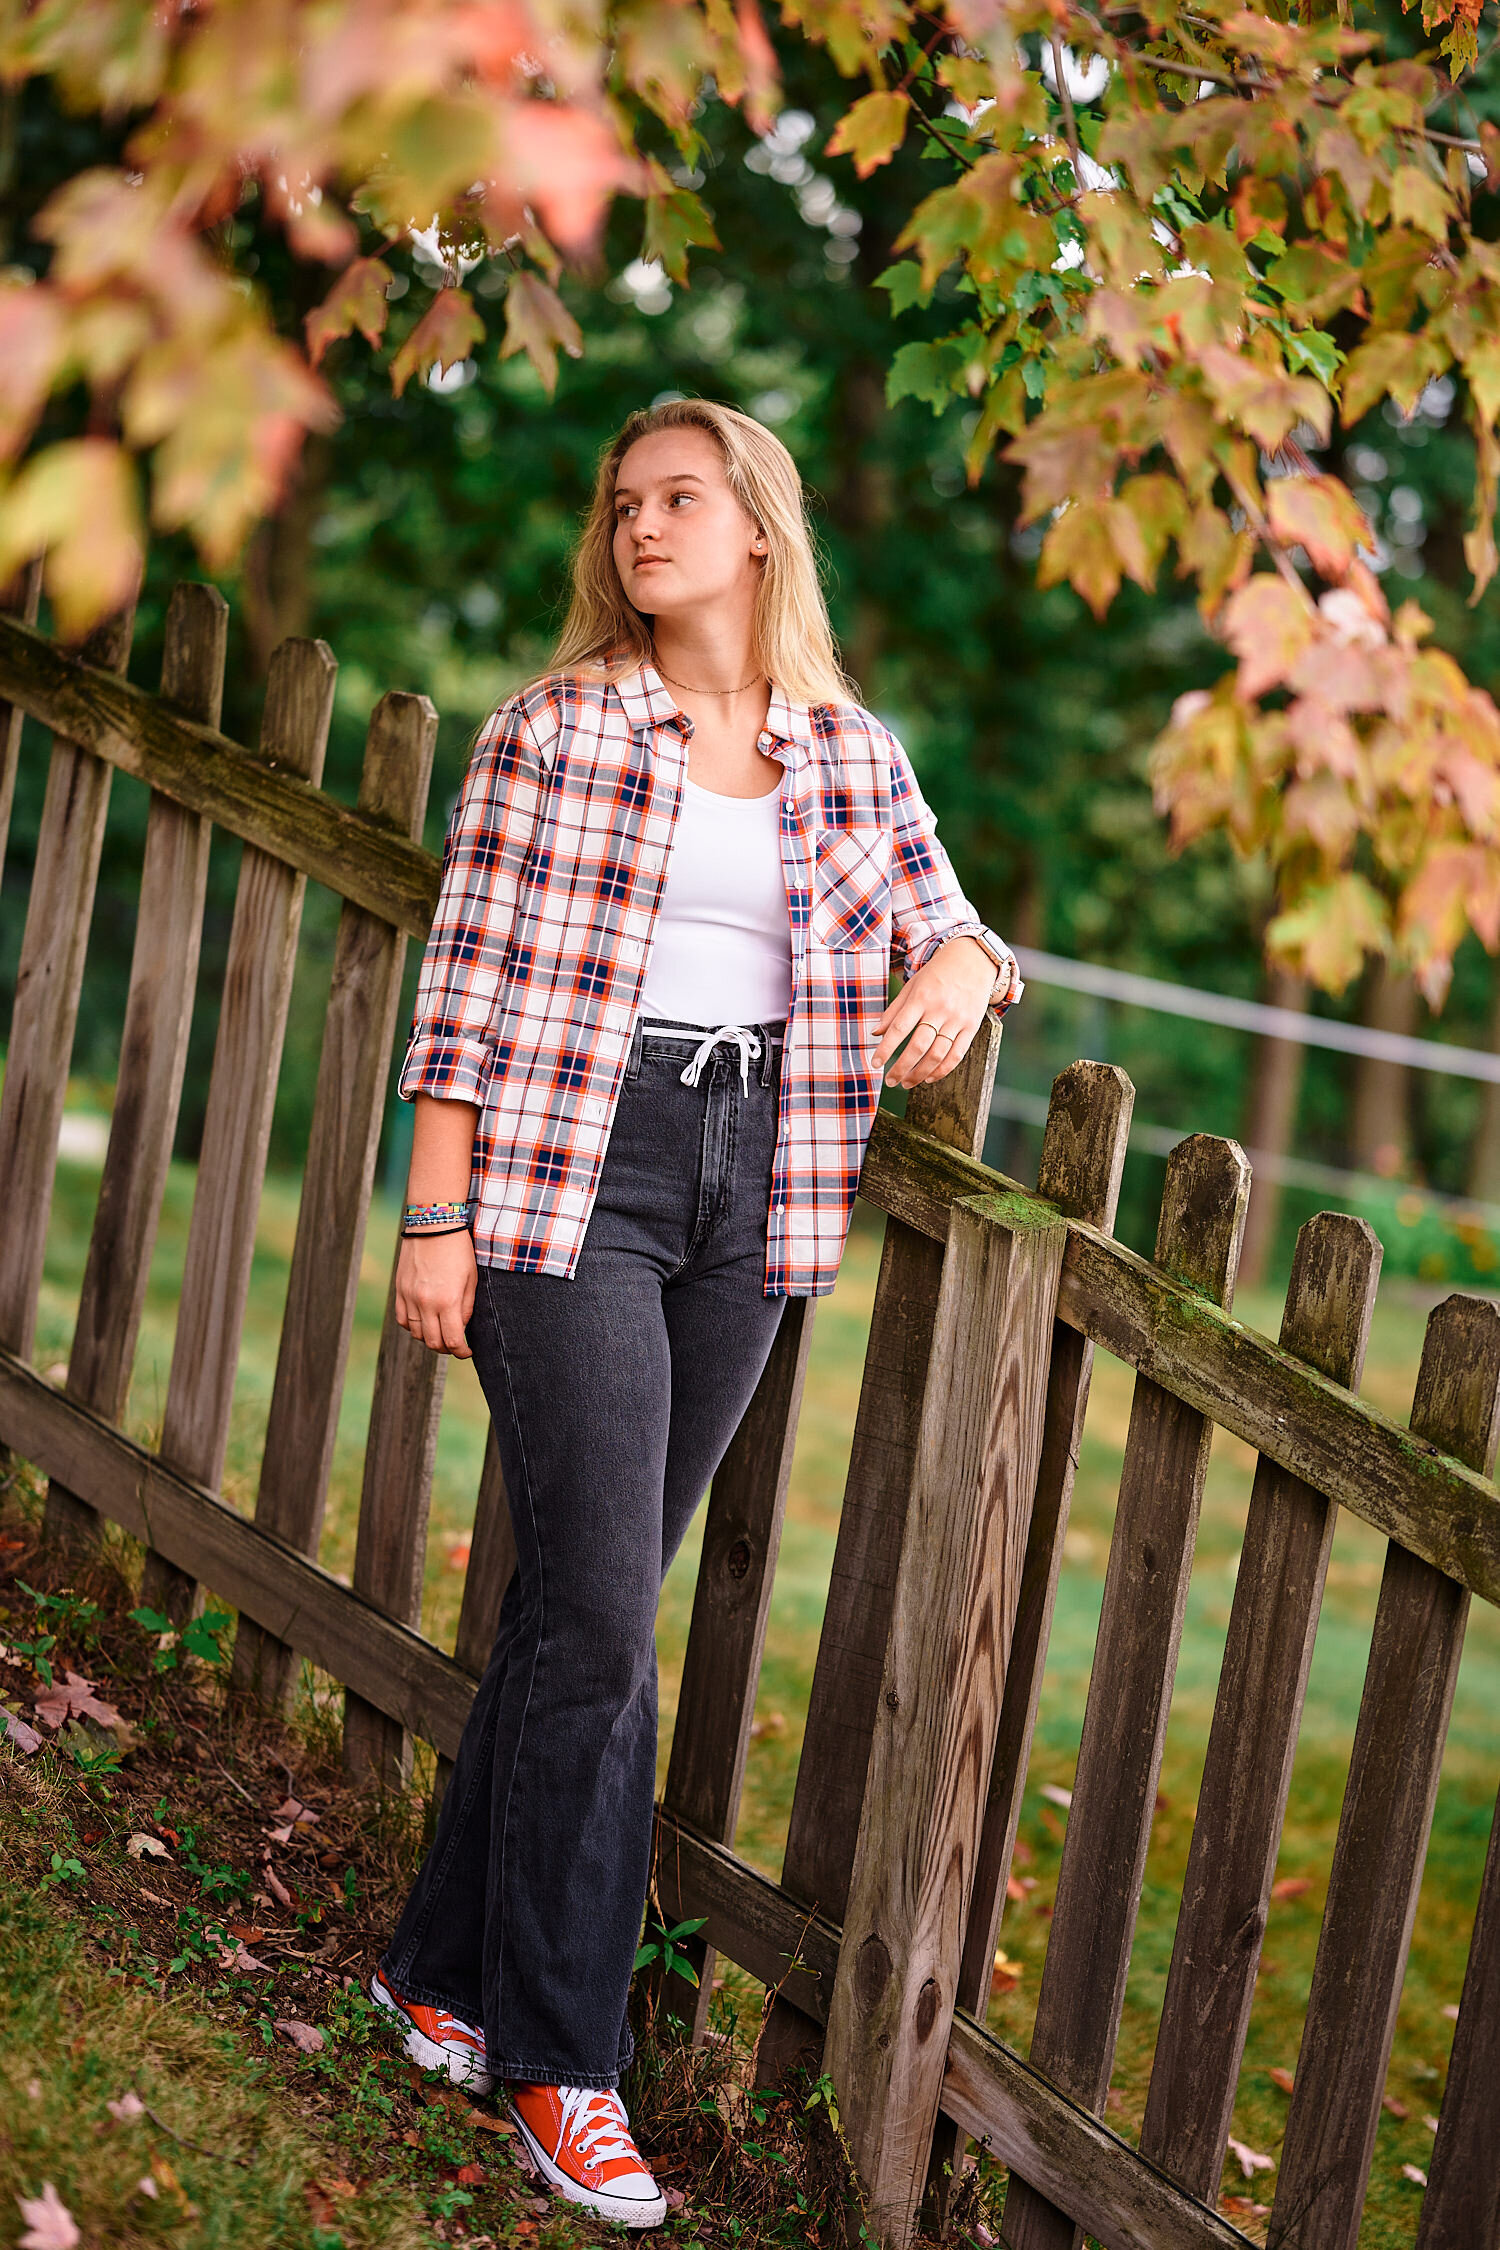  Alena is posing for a moody teenager photo series in her backyard on a rainy evening in Pittsburgh, Pennsylvania. She is dressed in her new checked shirt and flare jeans and looks cool and stylish. 